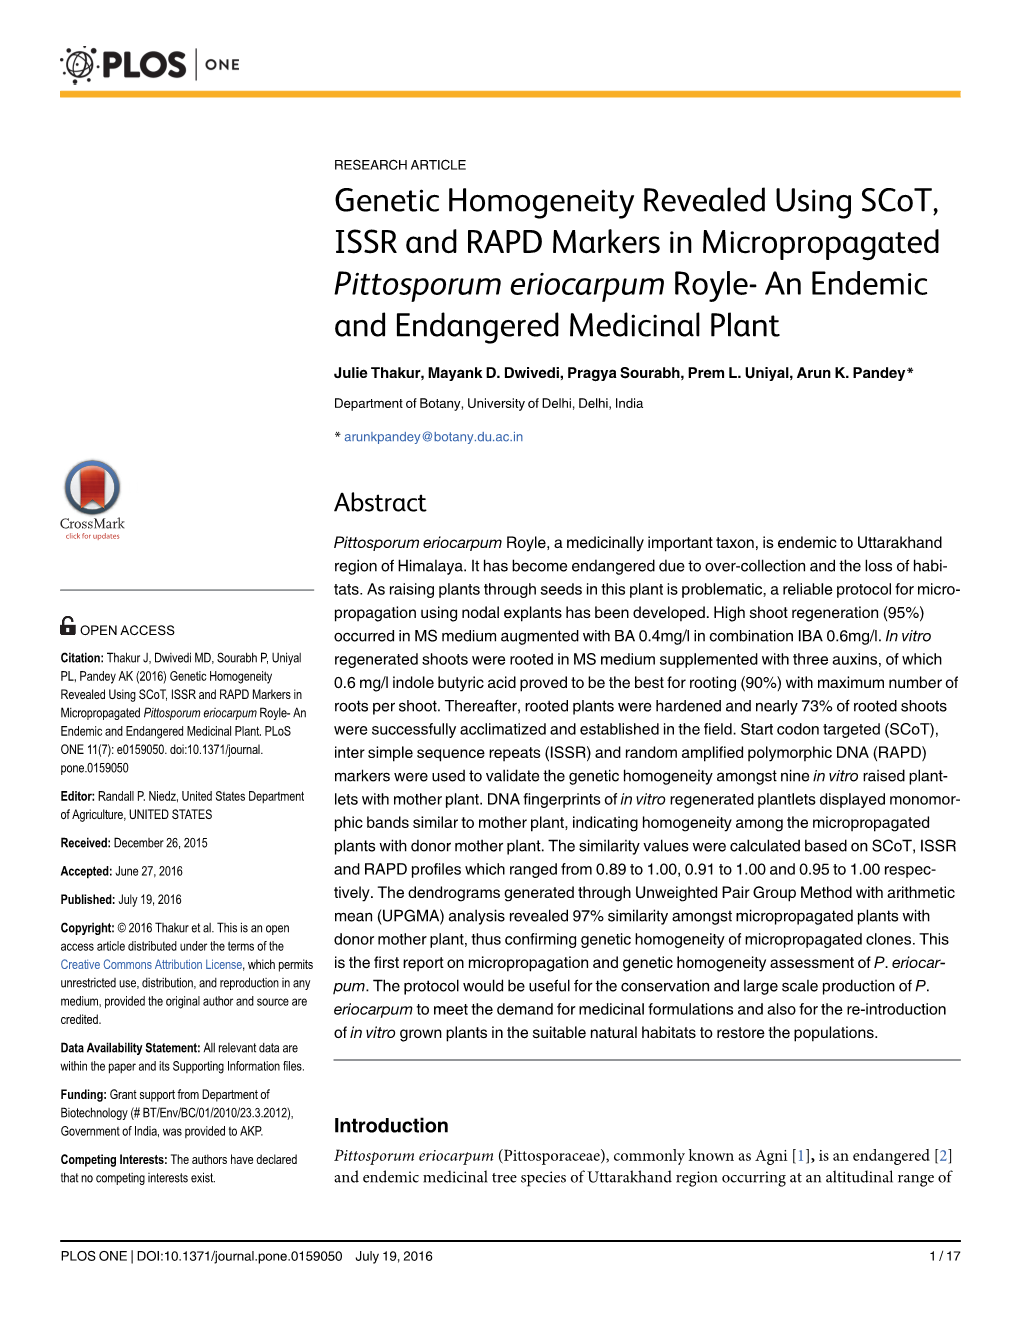 Genetic Homogeneity Revealed Using Scot, ISSR and RAPD Markers in Micropropagated Pittosporum Eriocarpum Royle- an Endemic and Endangered Medicinal Plant